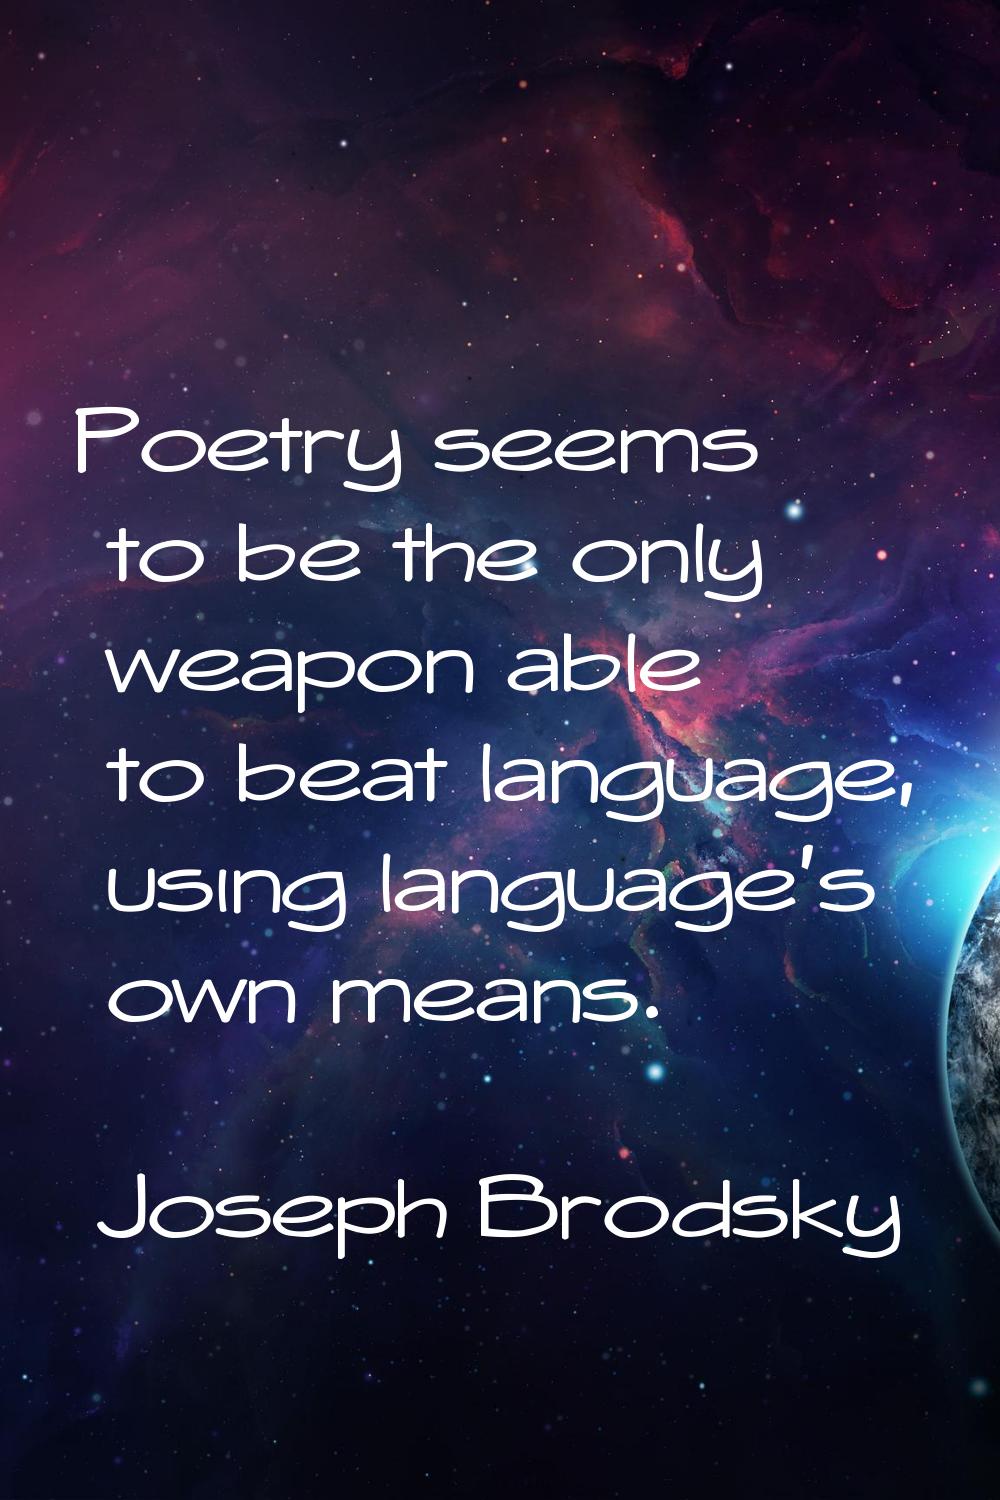 Poetry seems to be the only weapon able to beat language, using language's own means.